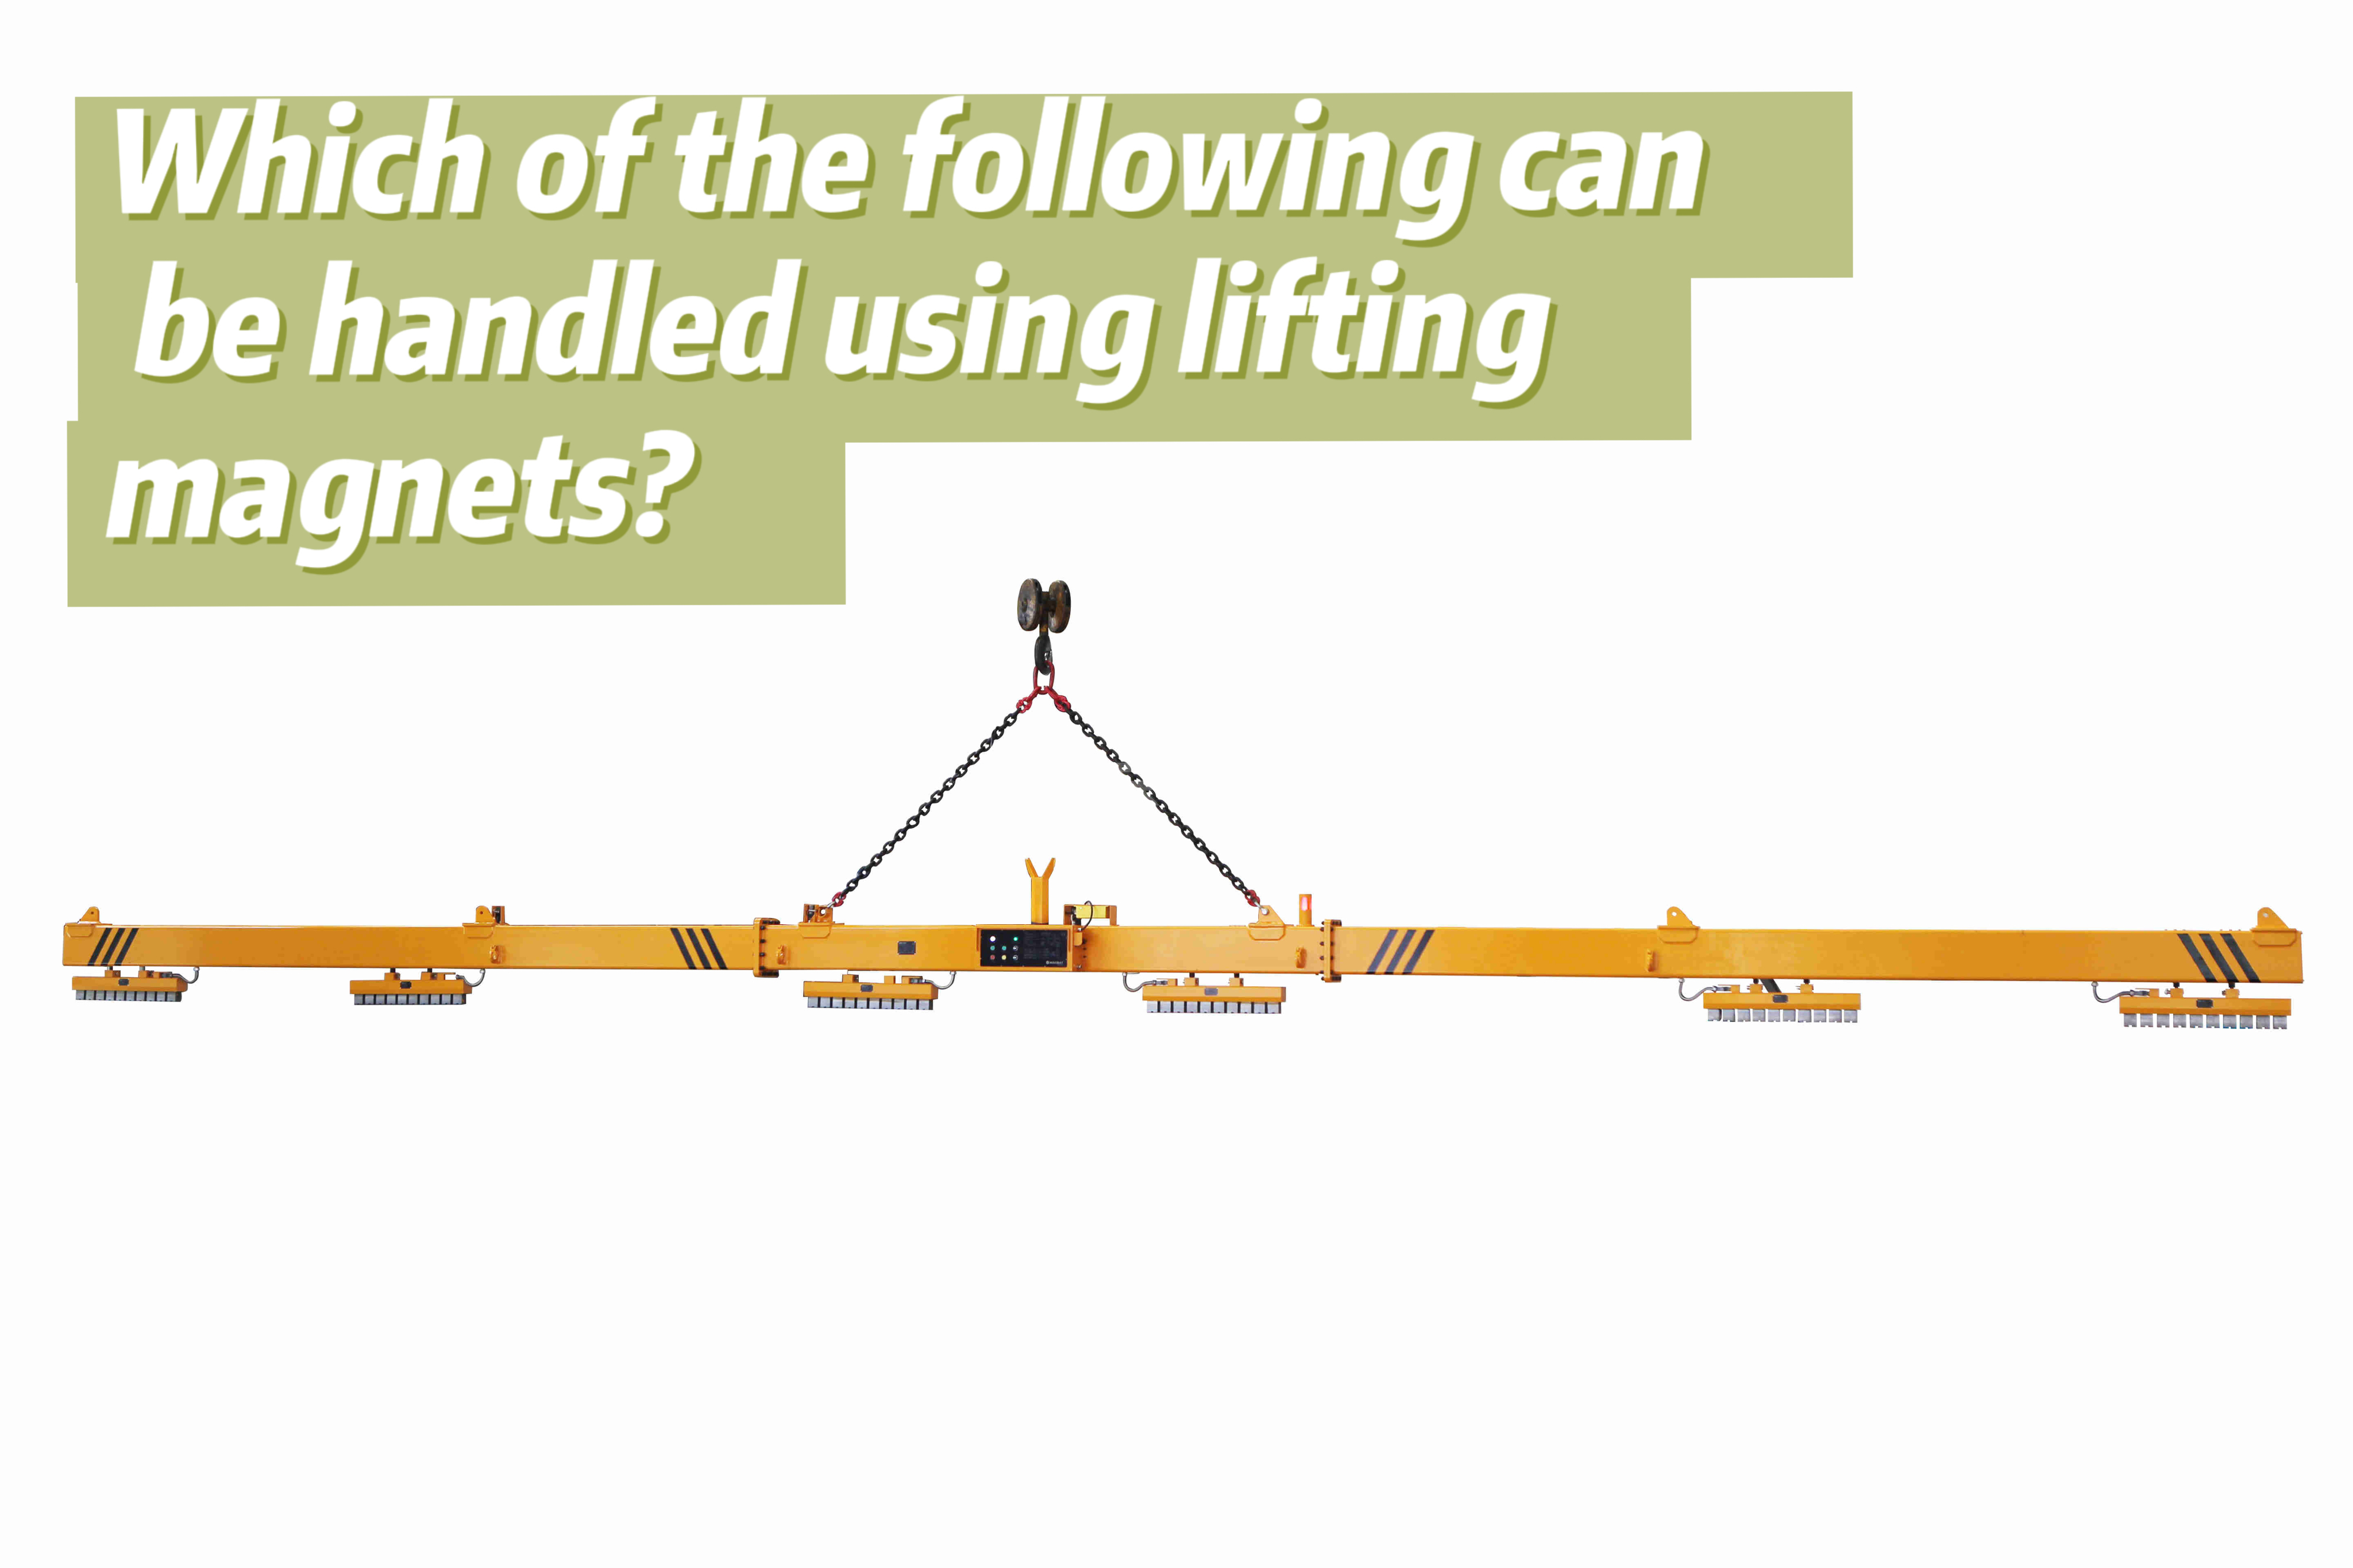 Which of the following can be handled using lifting magnets?